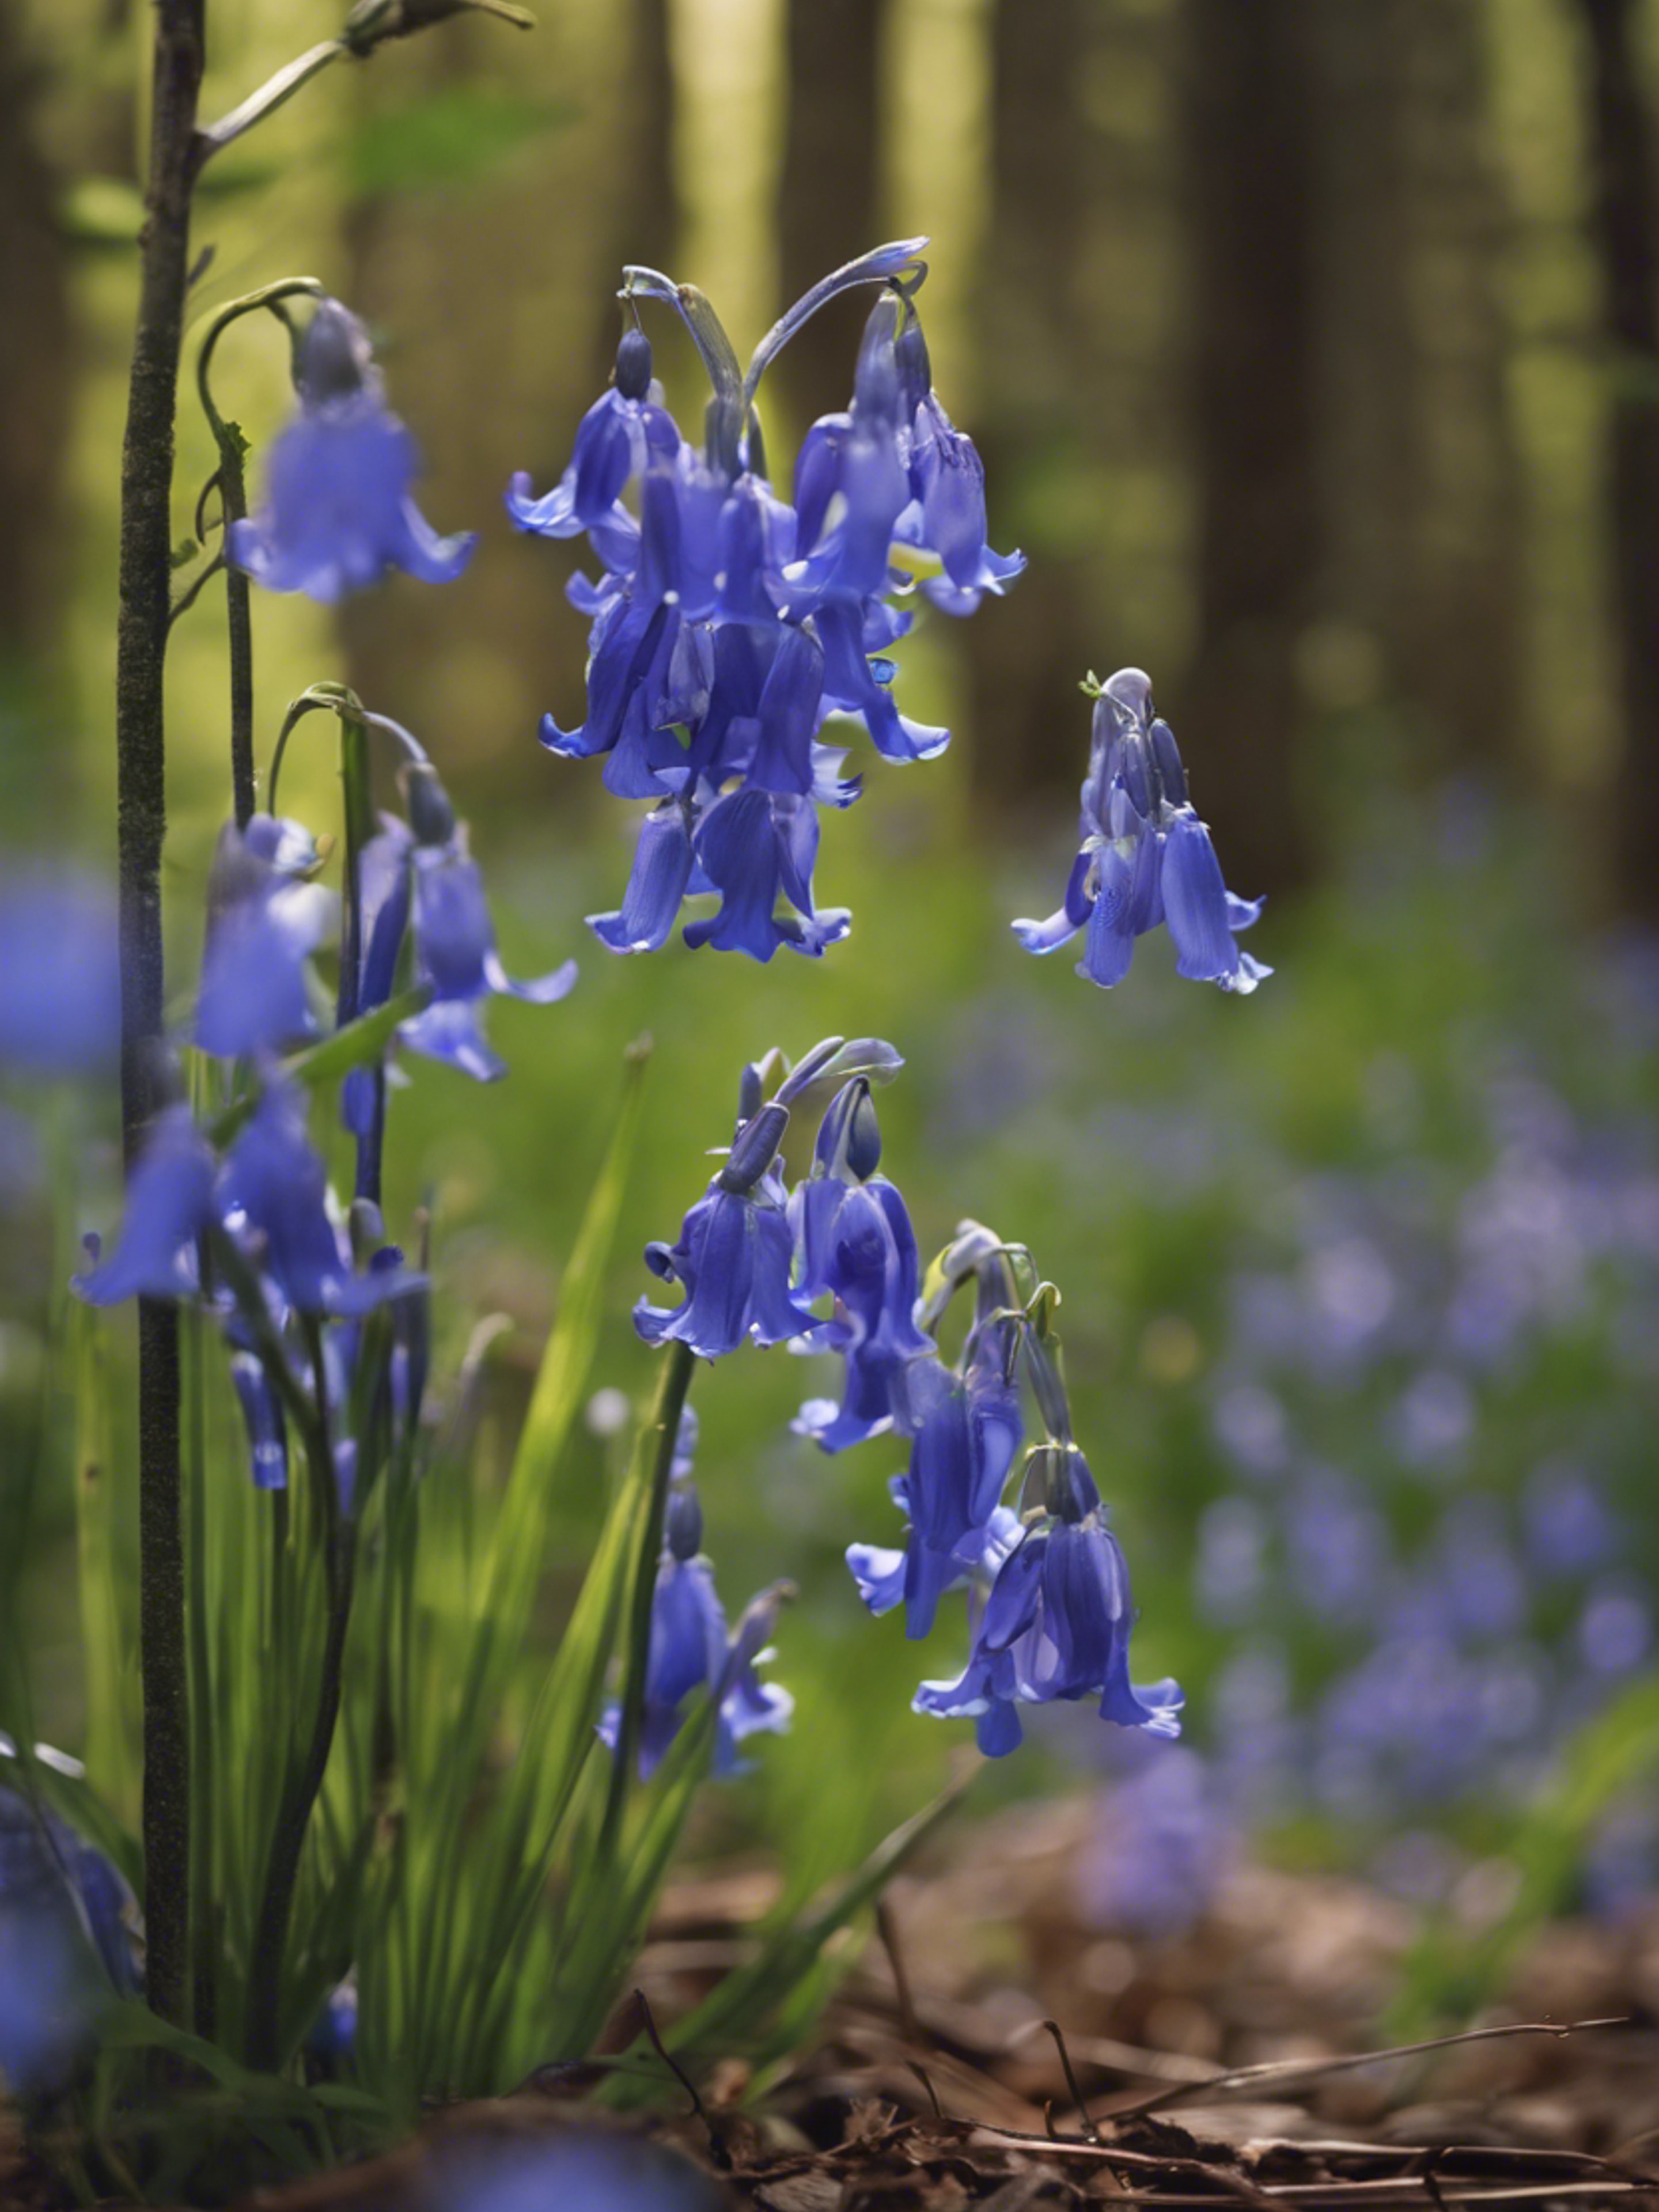 A cluster of bluebells growing in the heart of a dense, untouched forest. Tapeta[e9ac2ad9f62f40e2a0af]